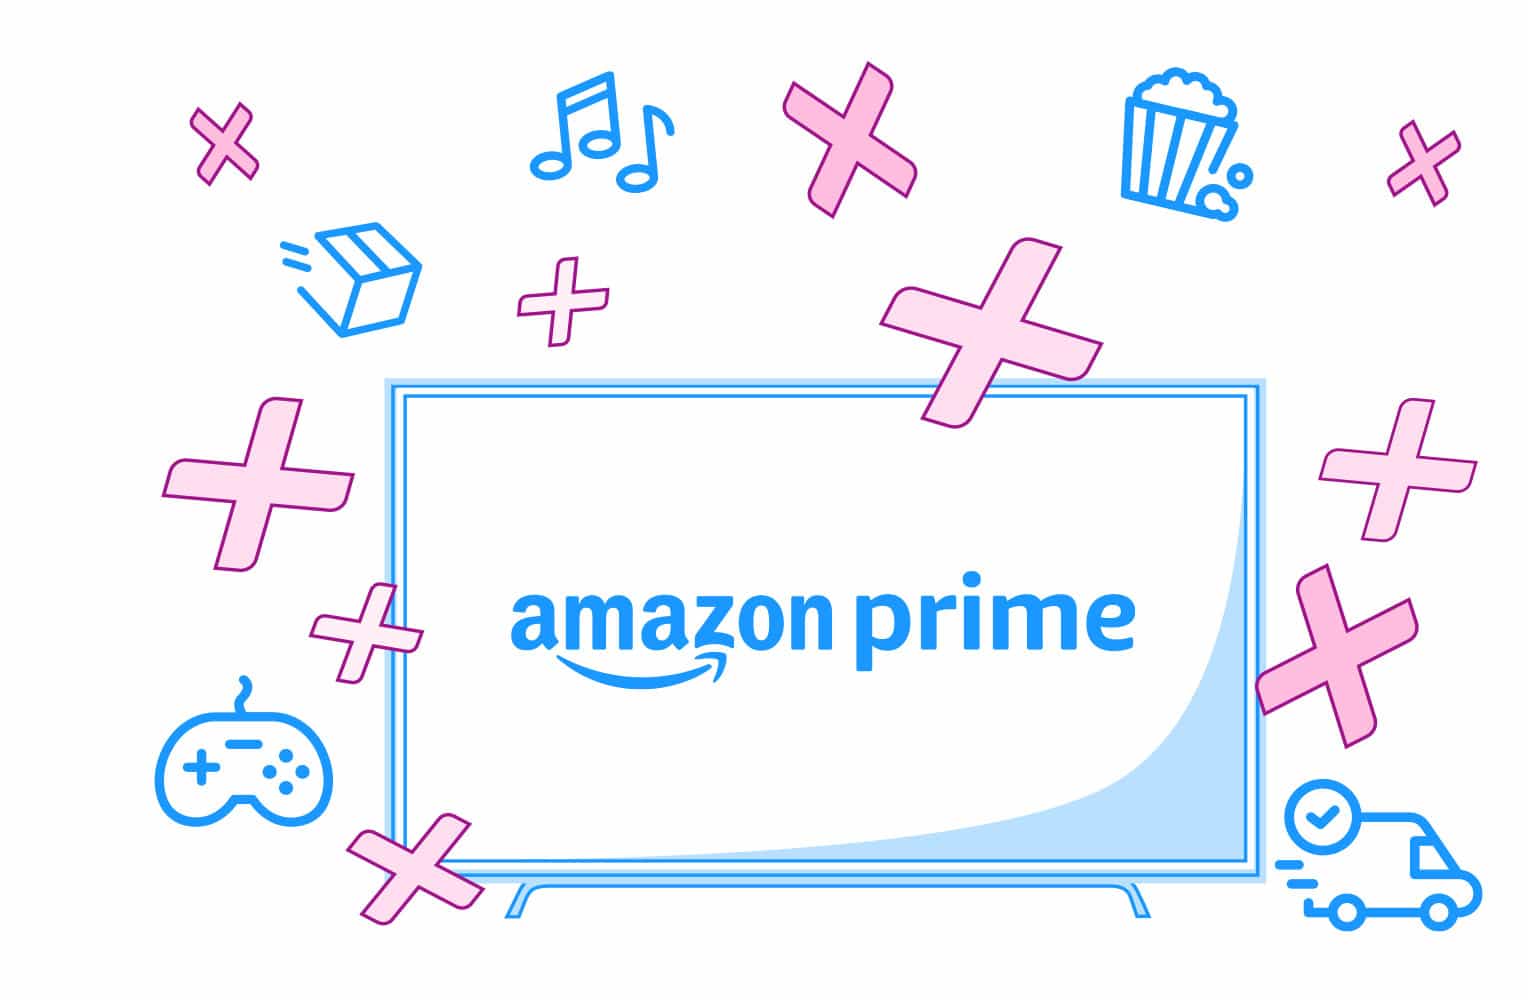 Get Amazon Prime 3-month membership for 8,000 Telstra points